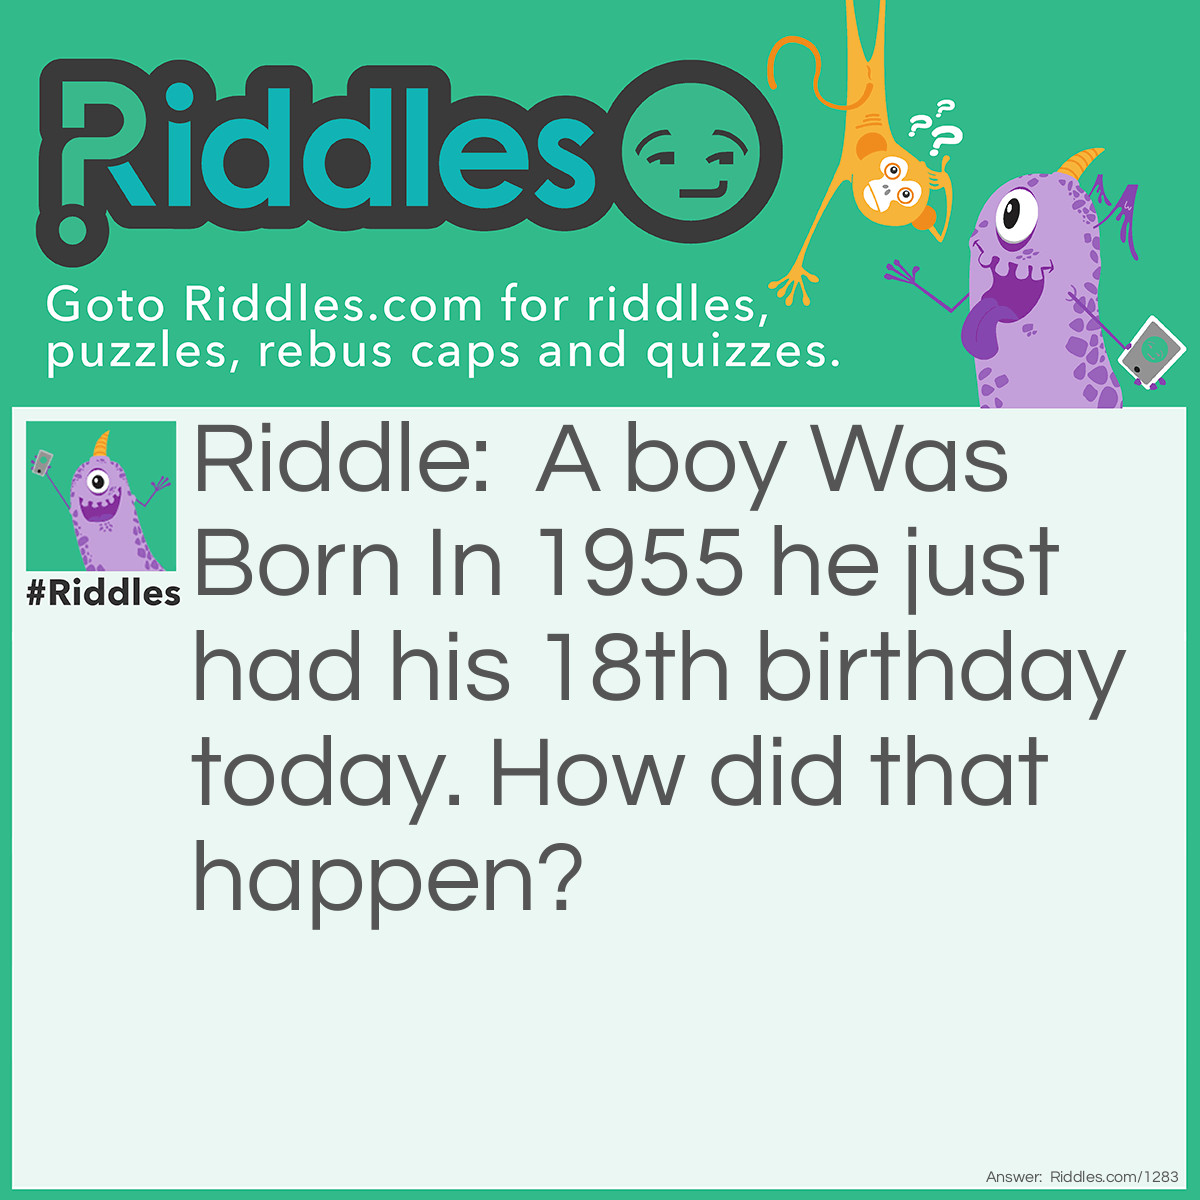 Riddle: A boy Was Born In 1955 he just had his 18th birthday today. How did that happen? Answer: 1955 is not the year he was born it was the hospital room he was born in.